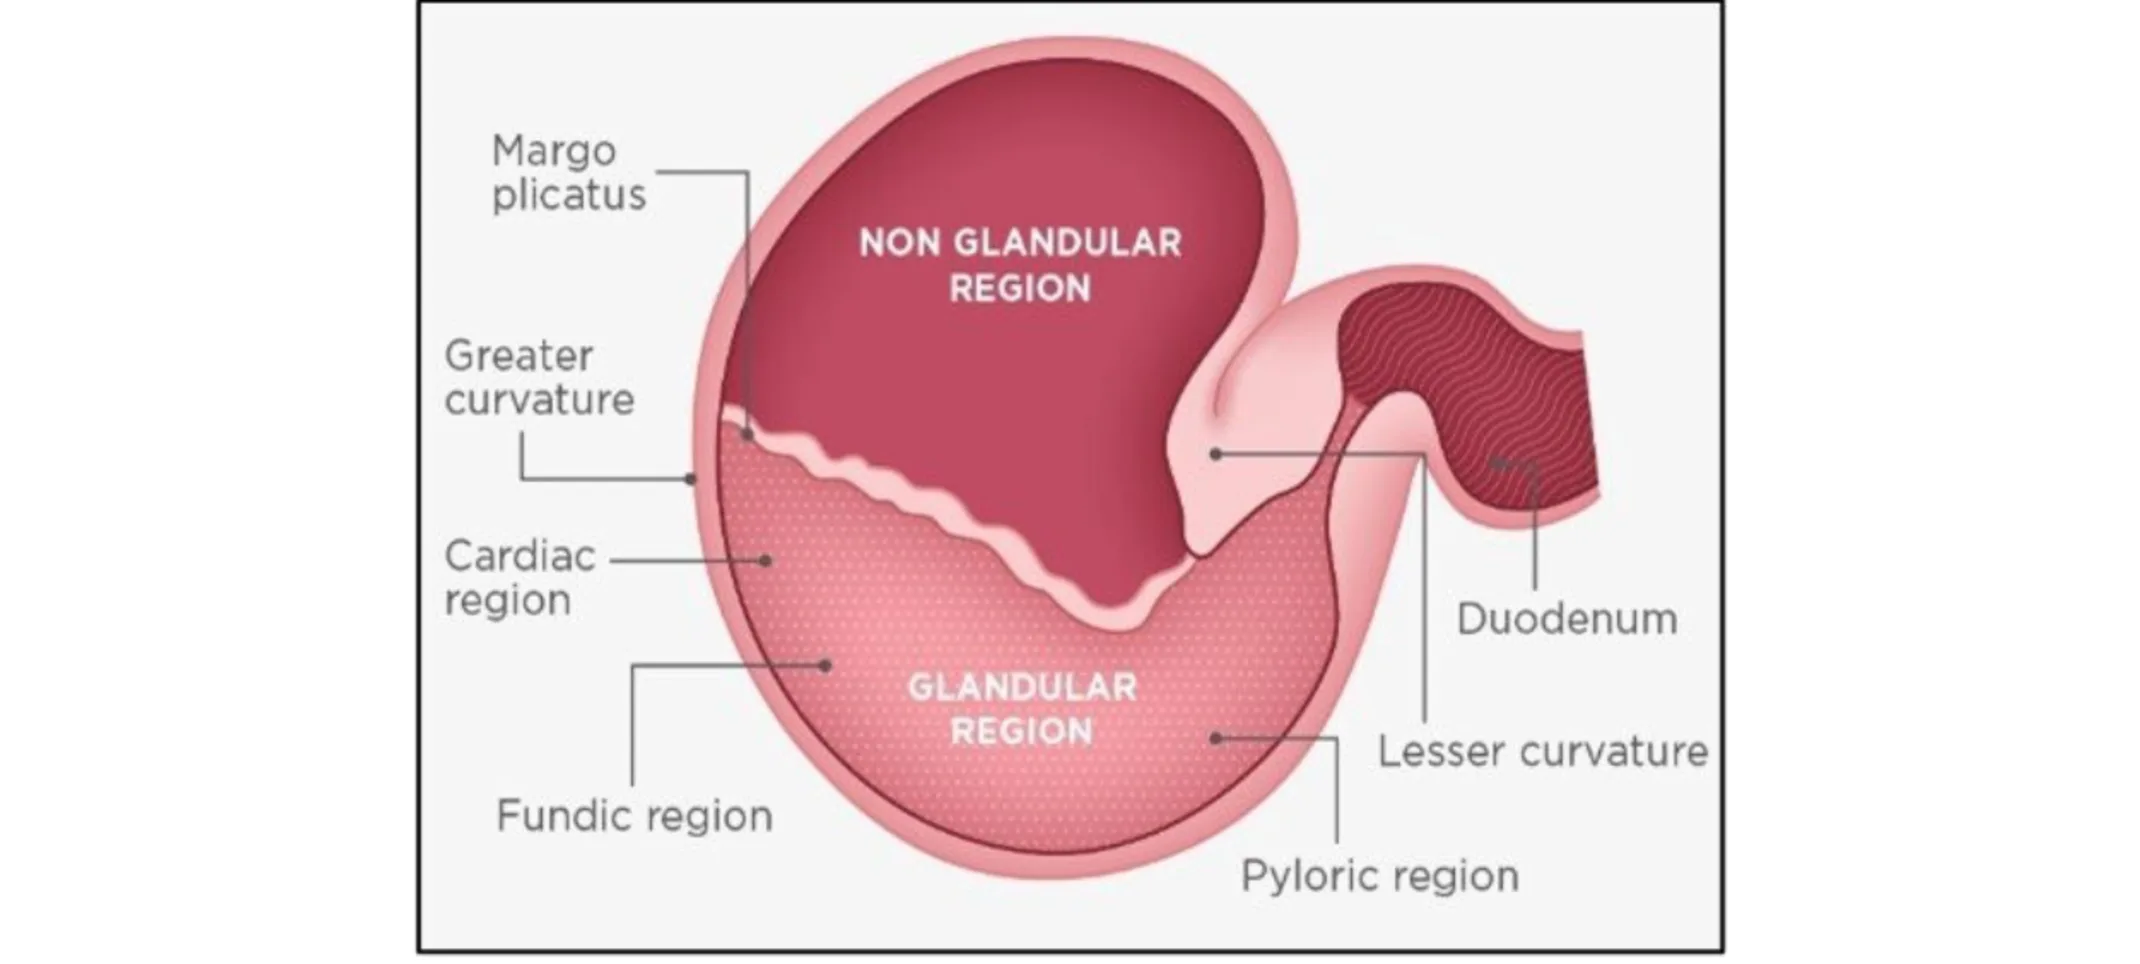 Image of stomach diagram